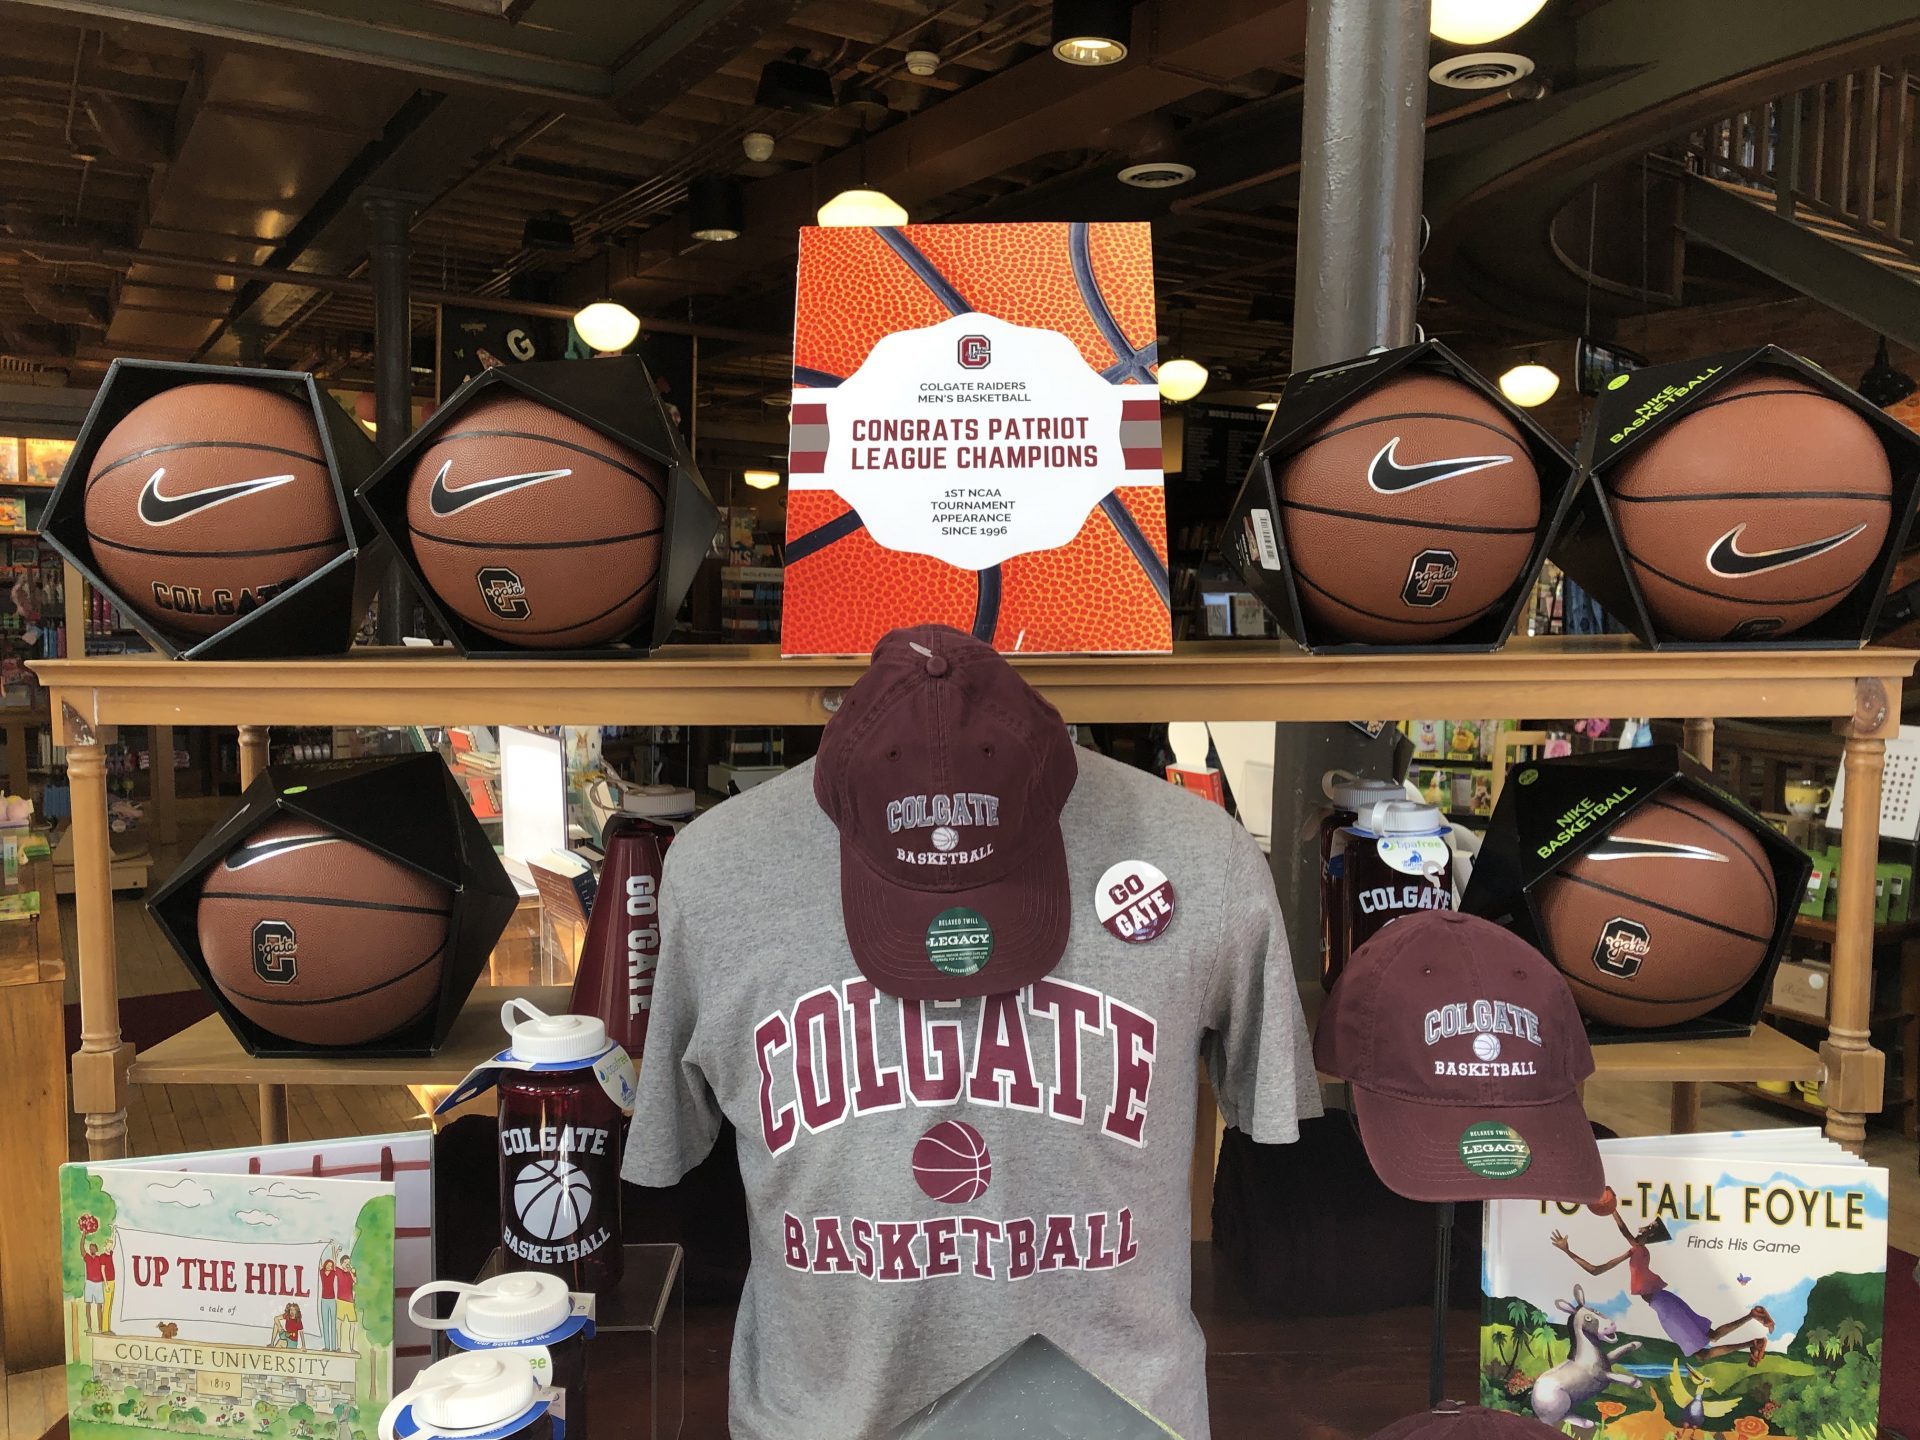 The Colgate Bookstore displays Colgate basketball gear front and center upon entry, congratulating the team on their Patriot League Championship.